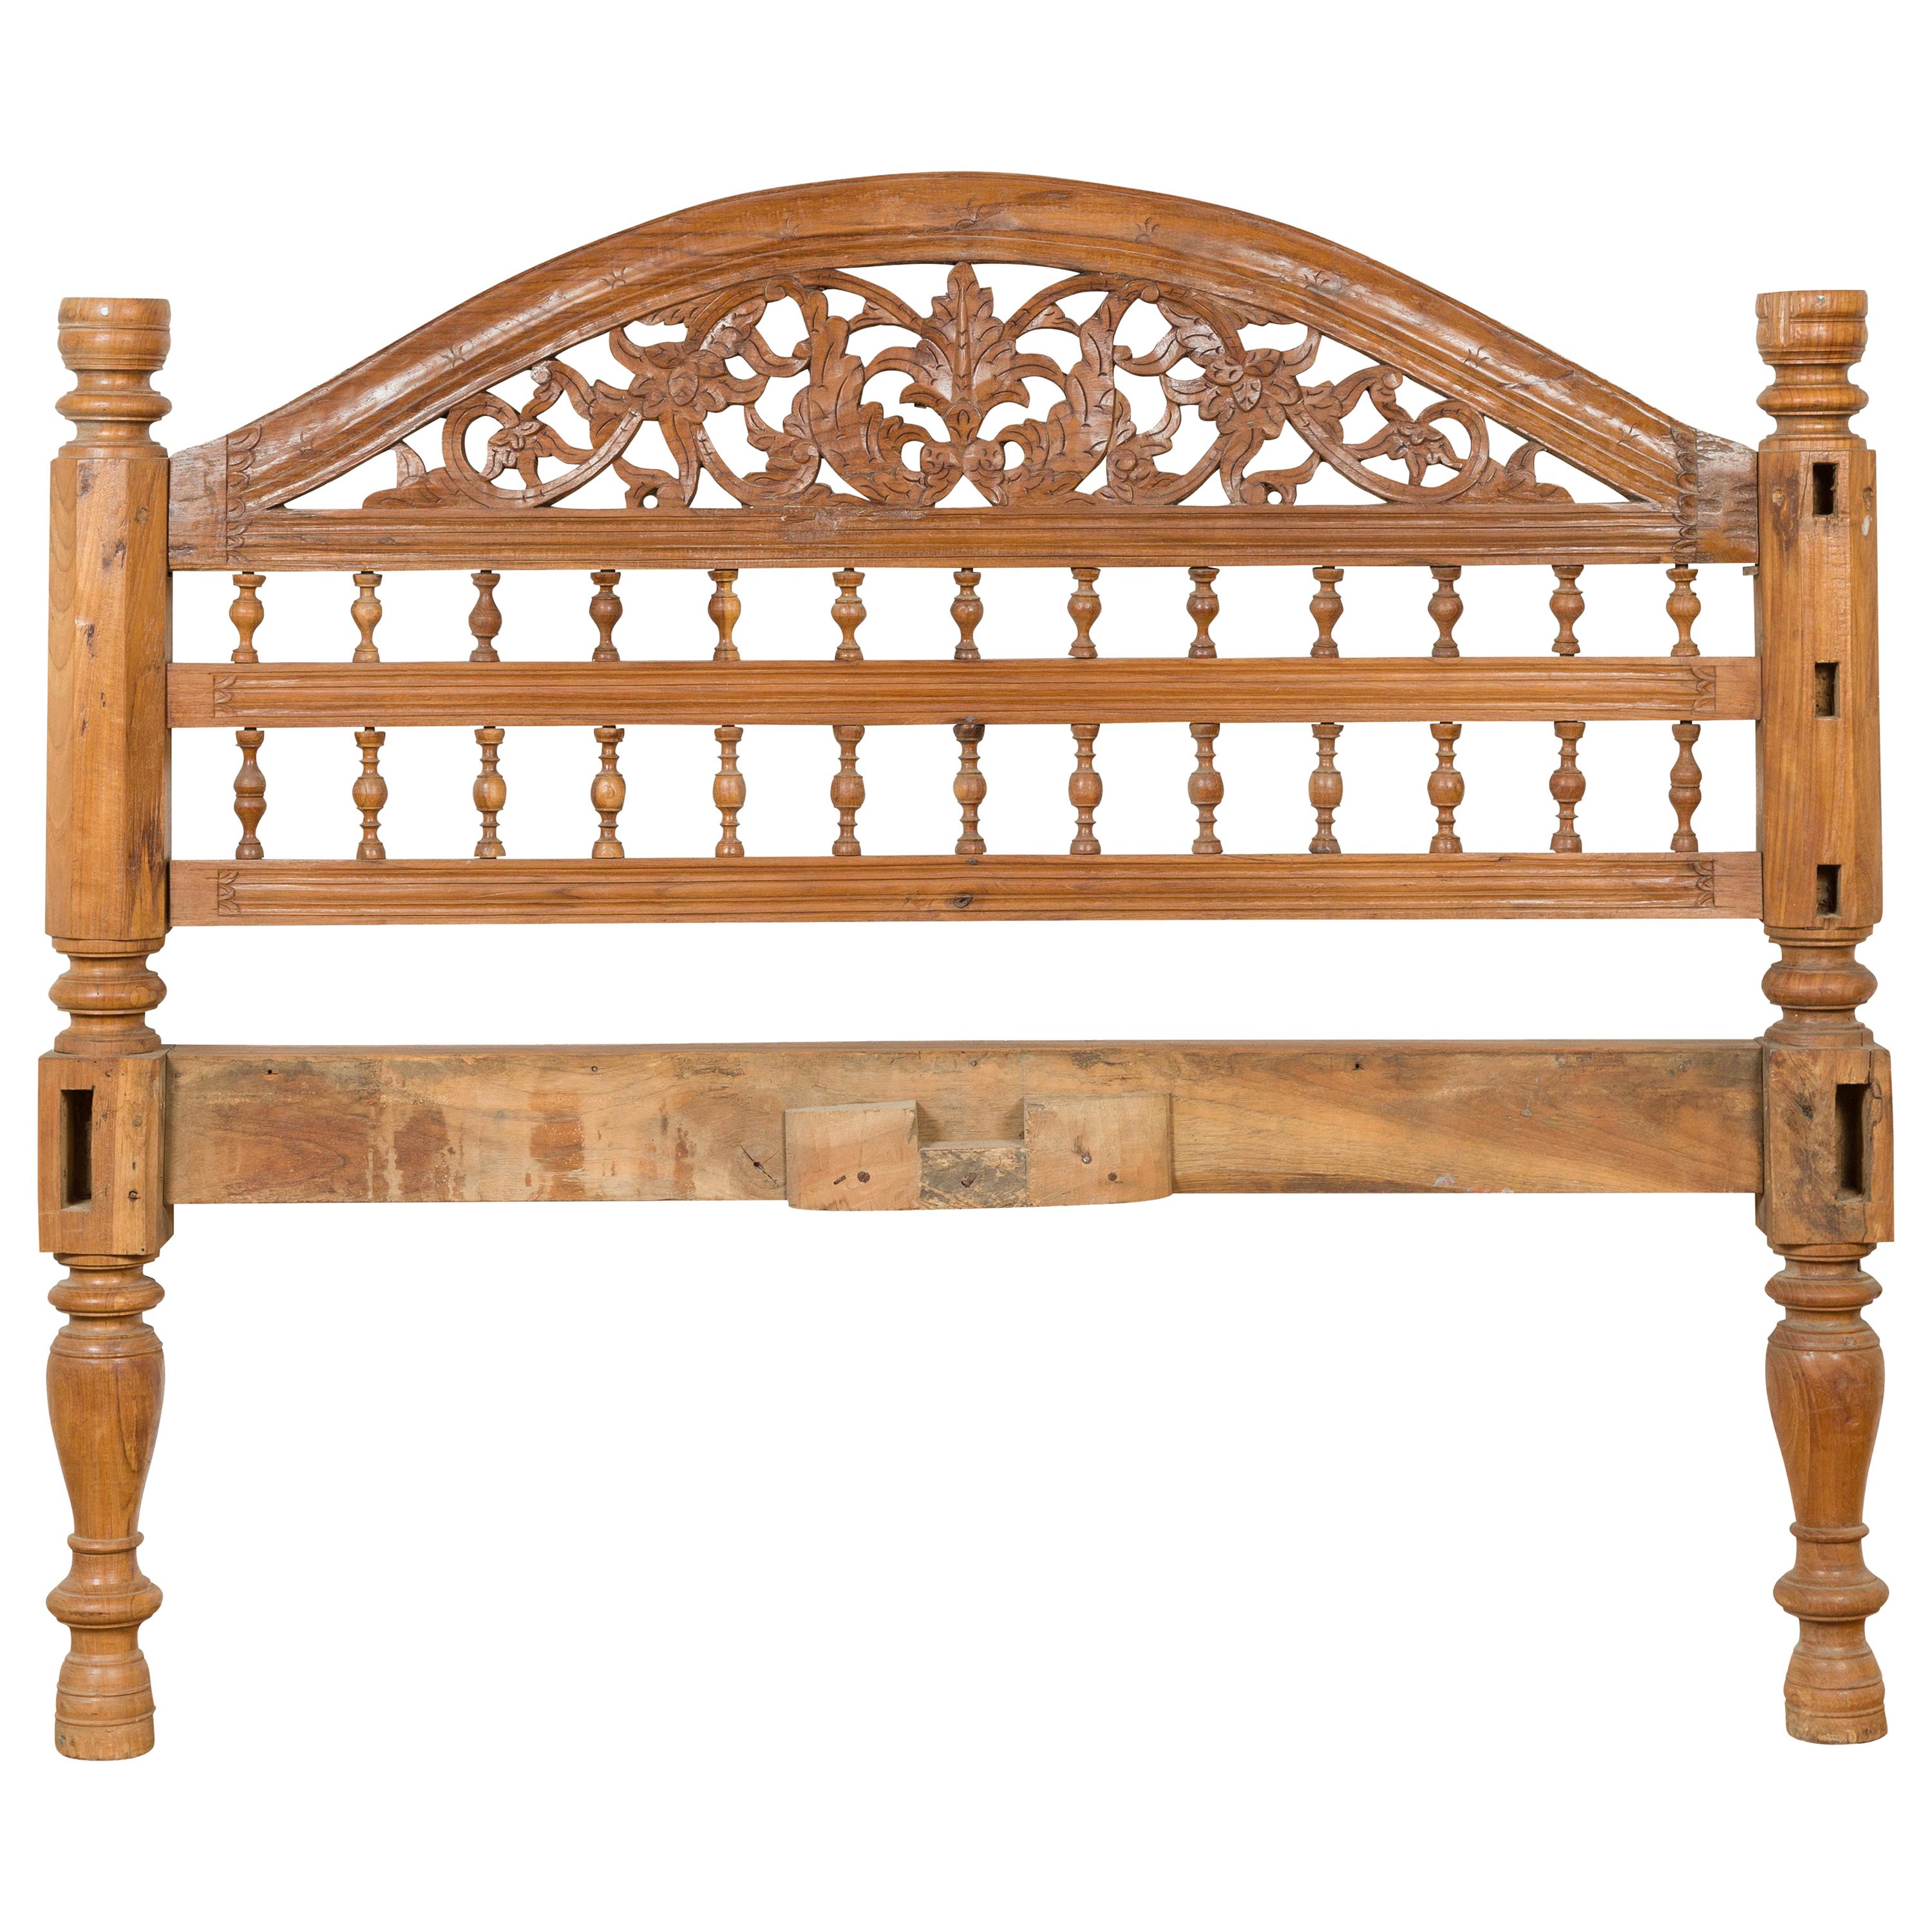 Vintage Carved Indonesian Headboard with Scrolling Foliage and Petite Balusters